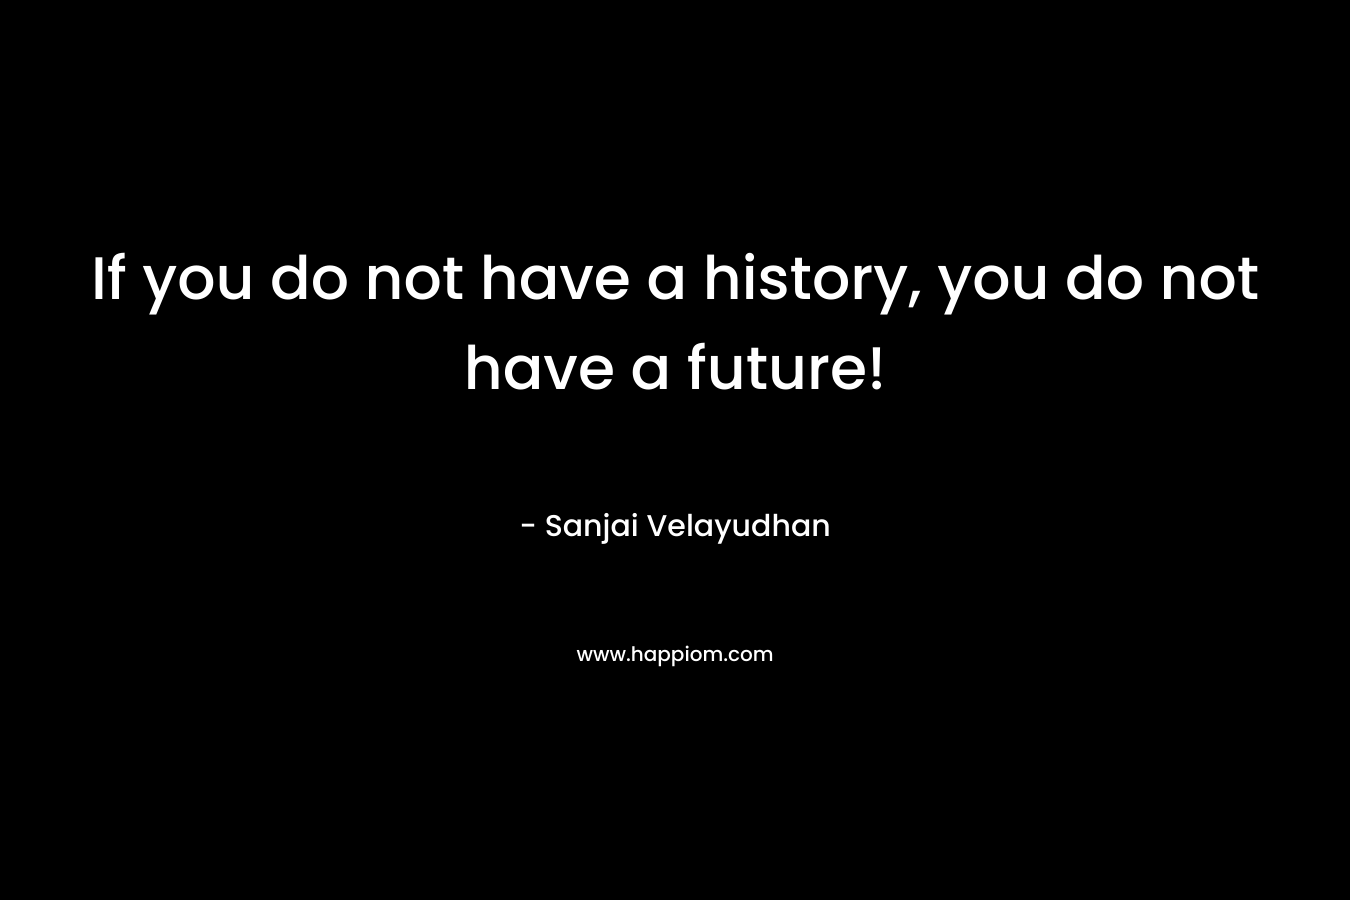 If you do not have a history, you do not have a future! – Sanjai Velayudhan